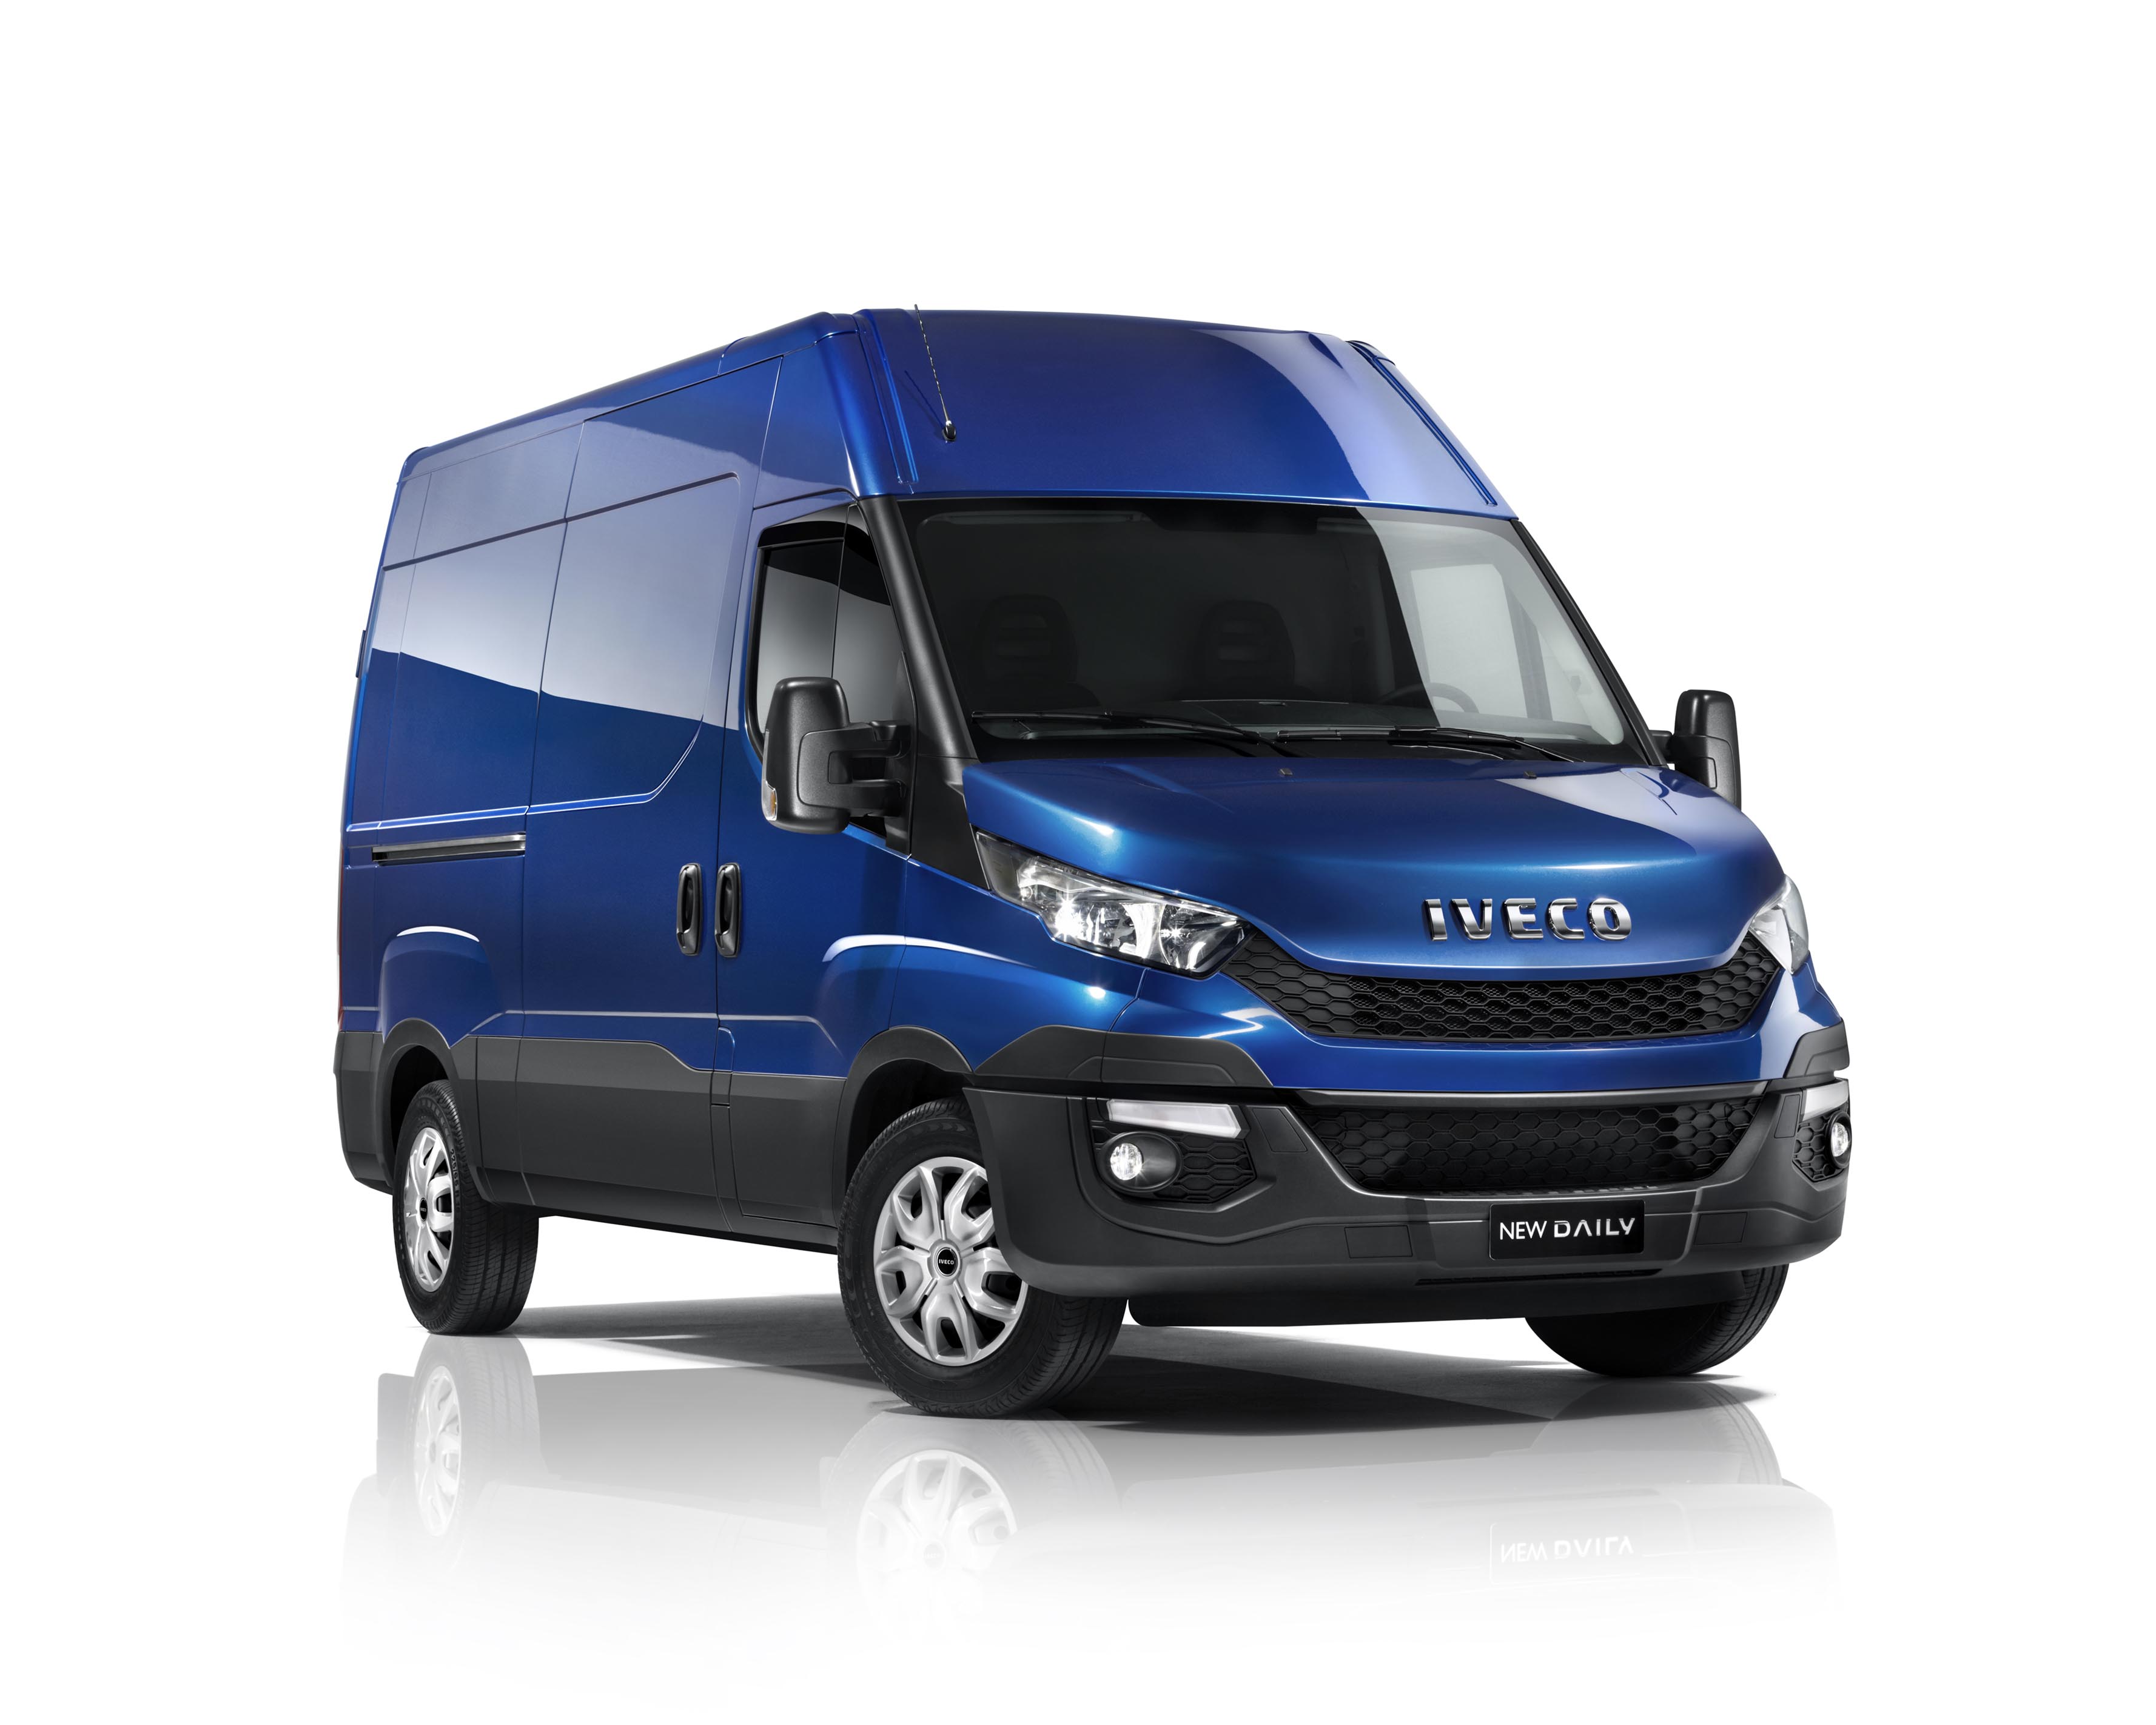 Amazing Iveco Pictures & Backgrounds